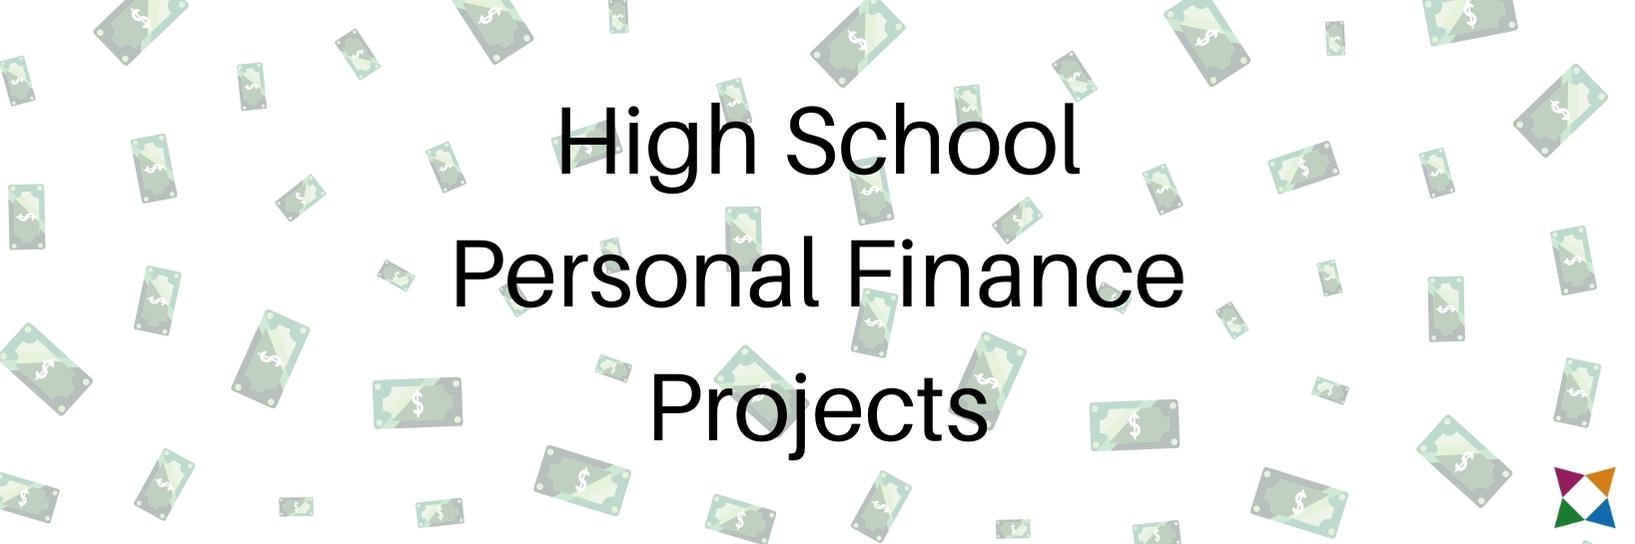 5 Top Personal Finance Projects for High School